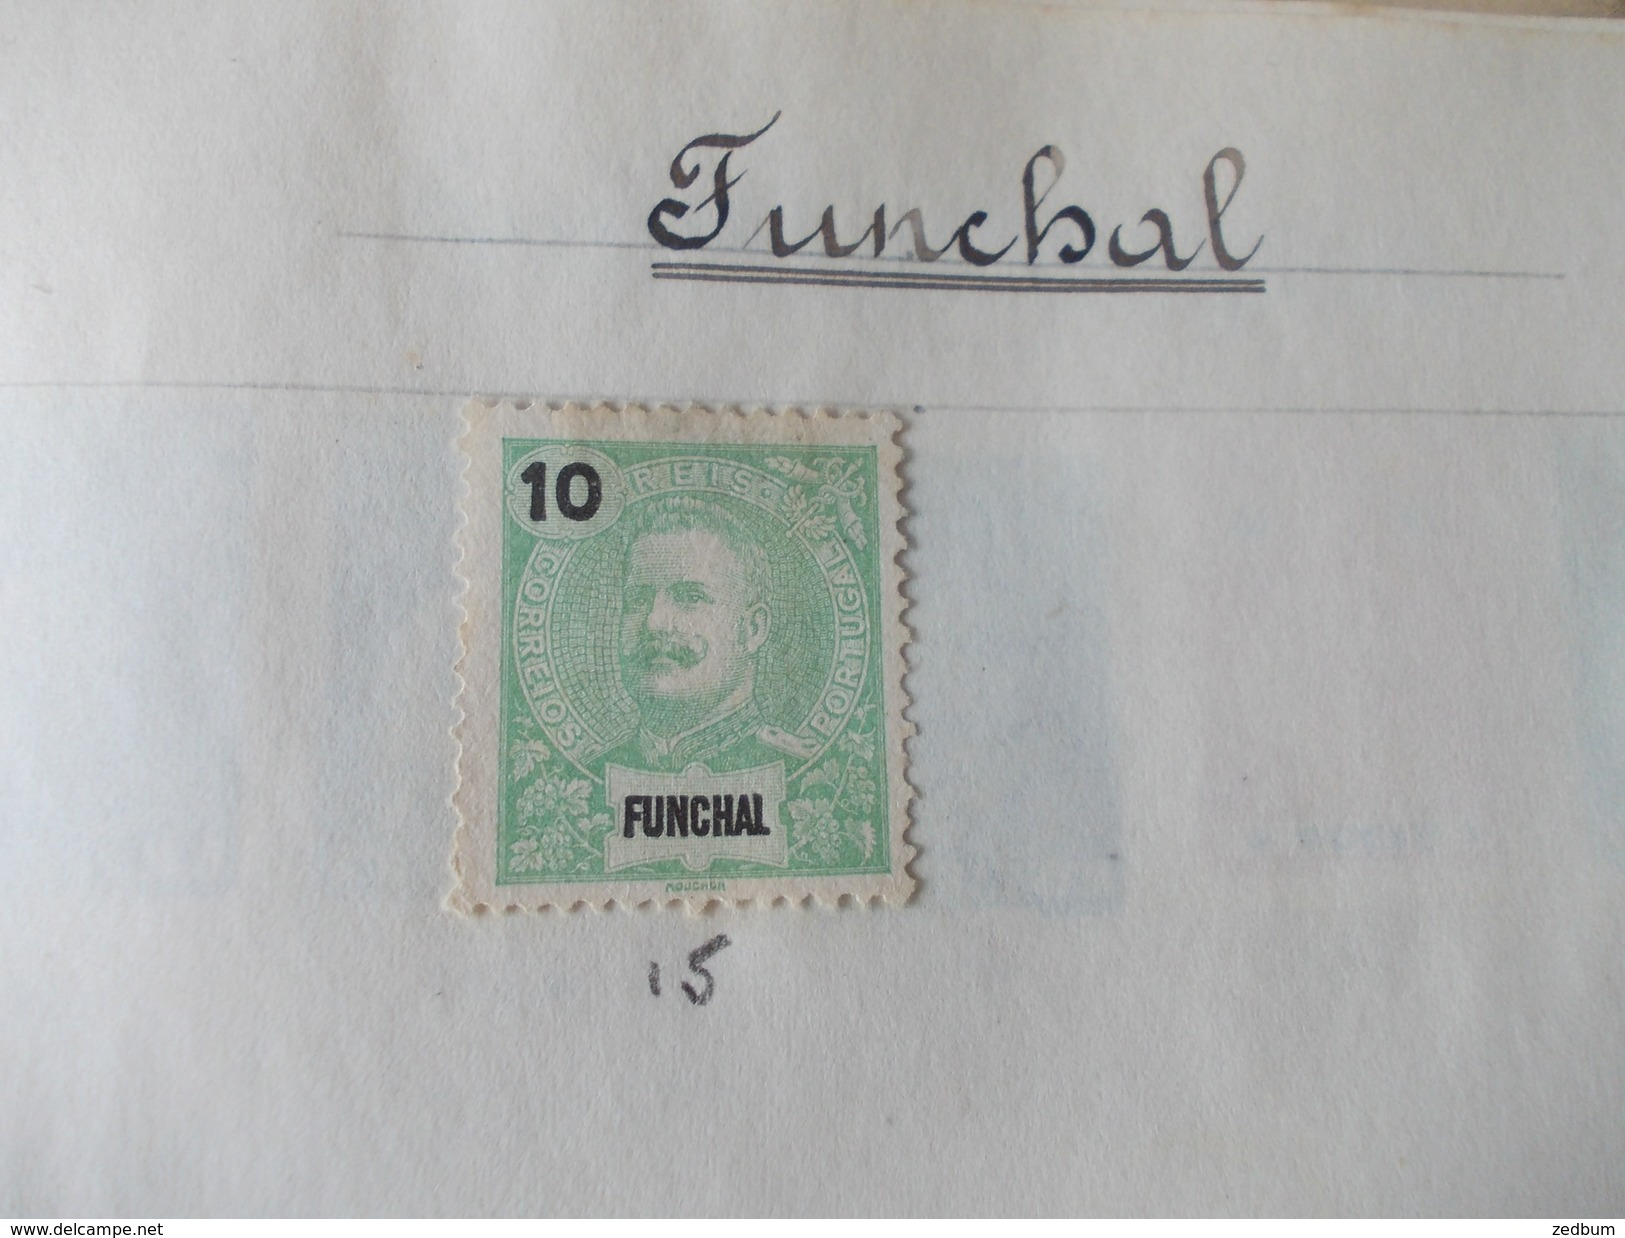 TIMBRE 5 Pages Funchal Guinée Portugaise Inde Hyderabad Hong Kong 12 Timbres Valeur 3.55 &euro; - Portugees Guinea